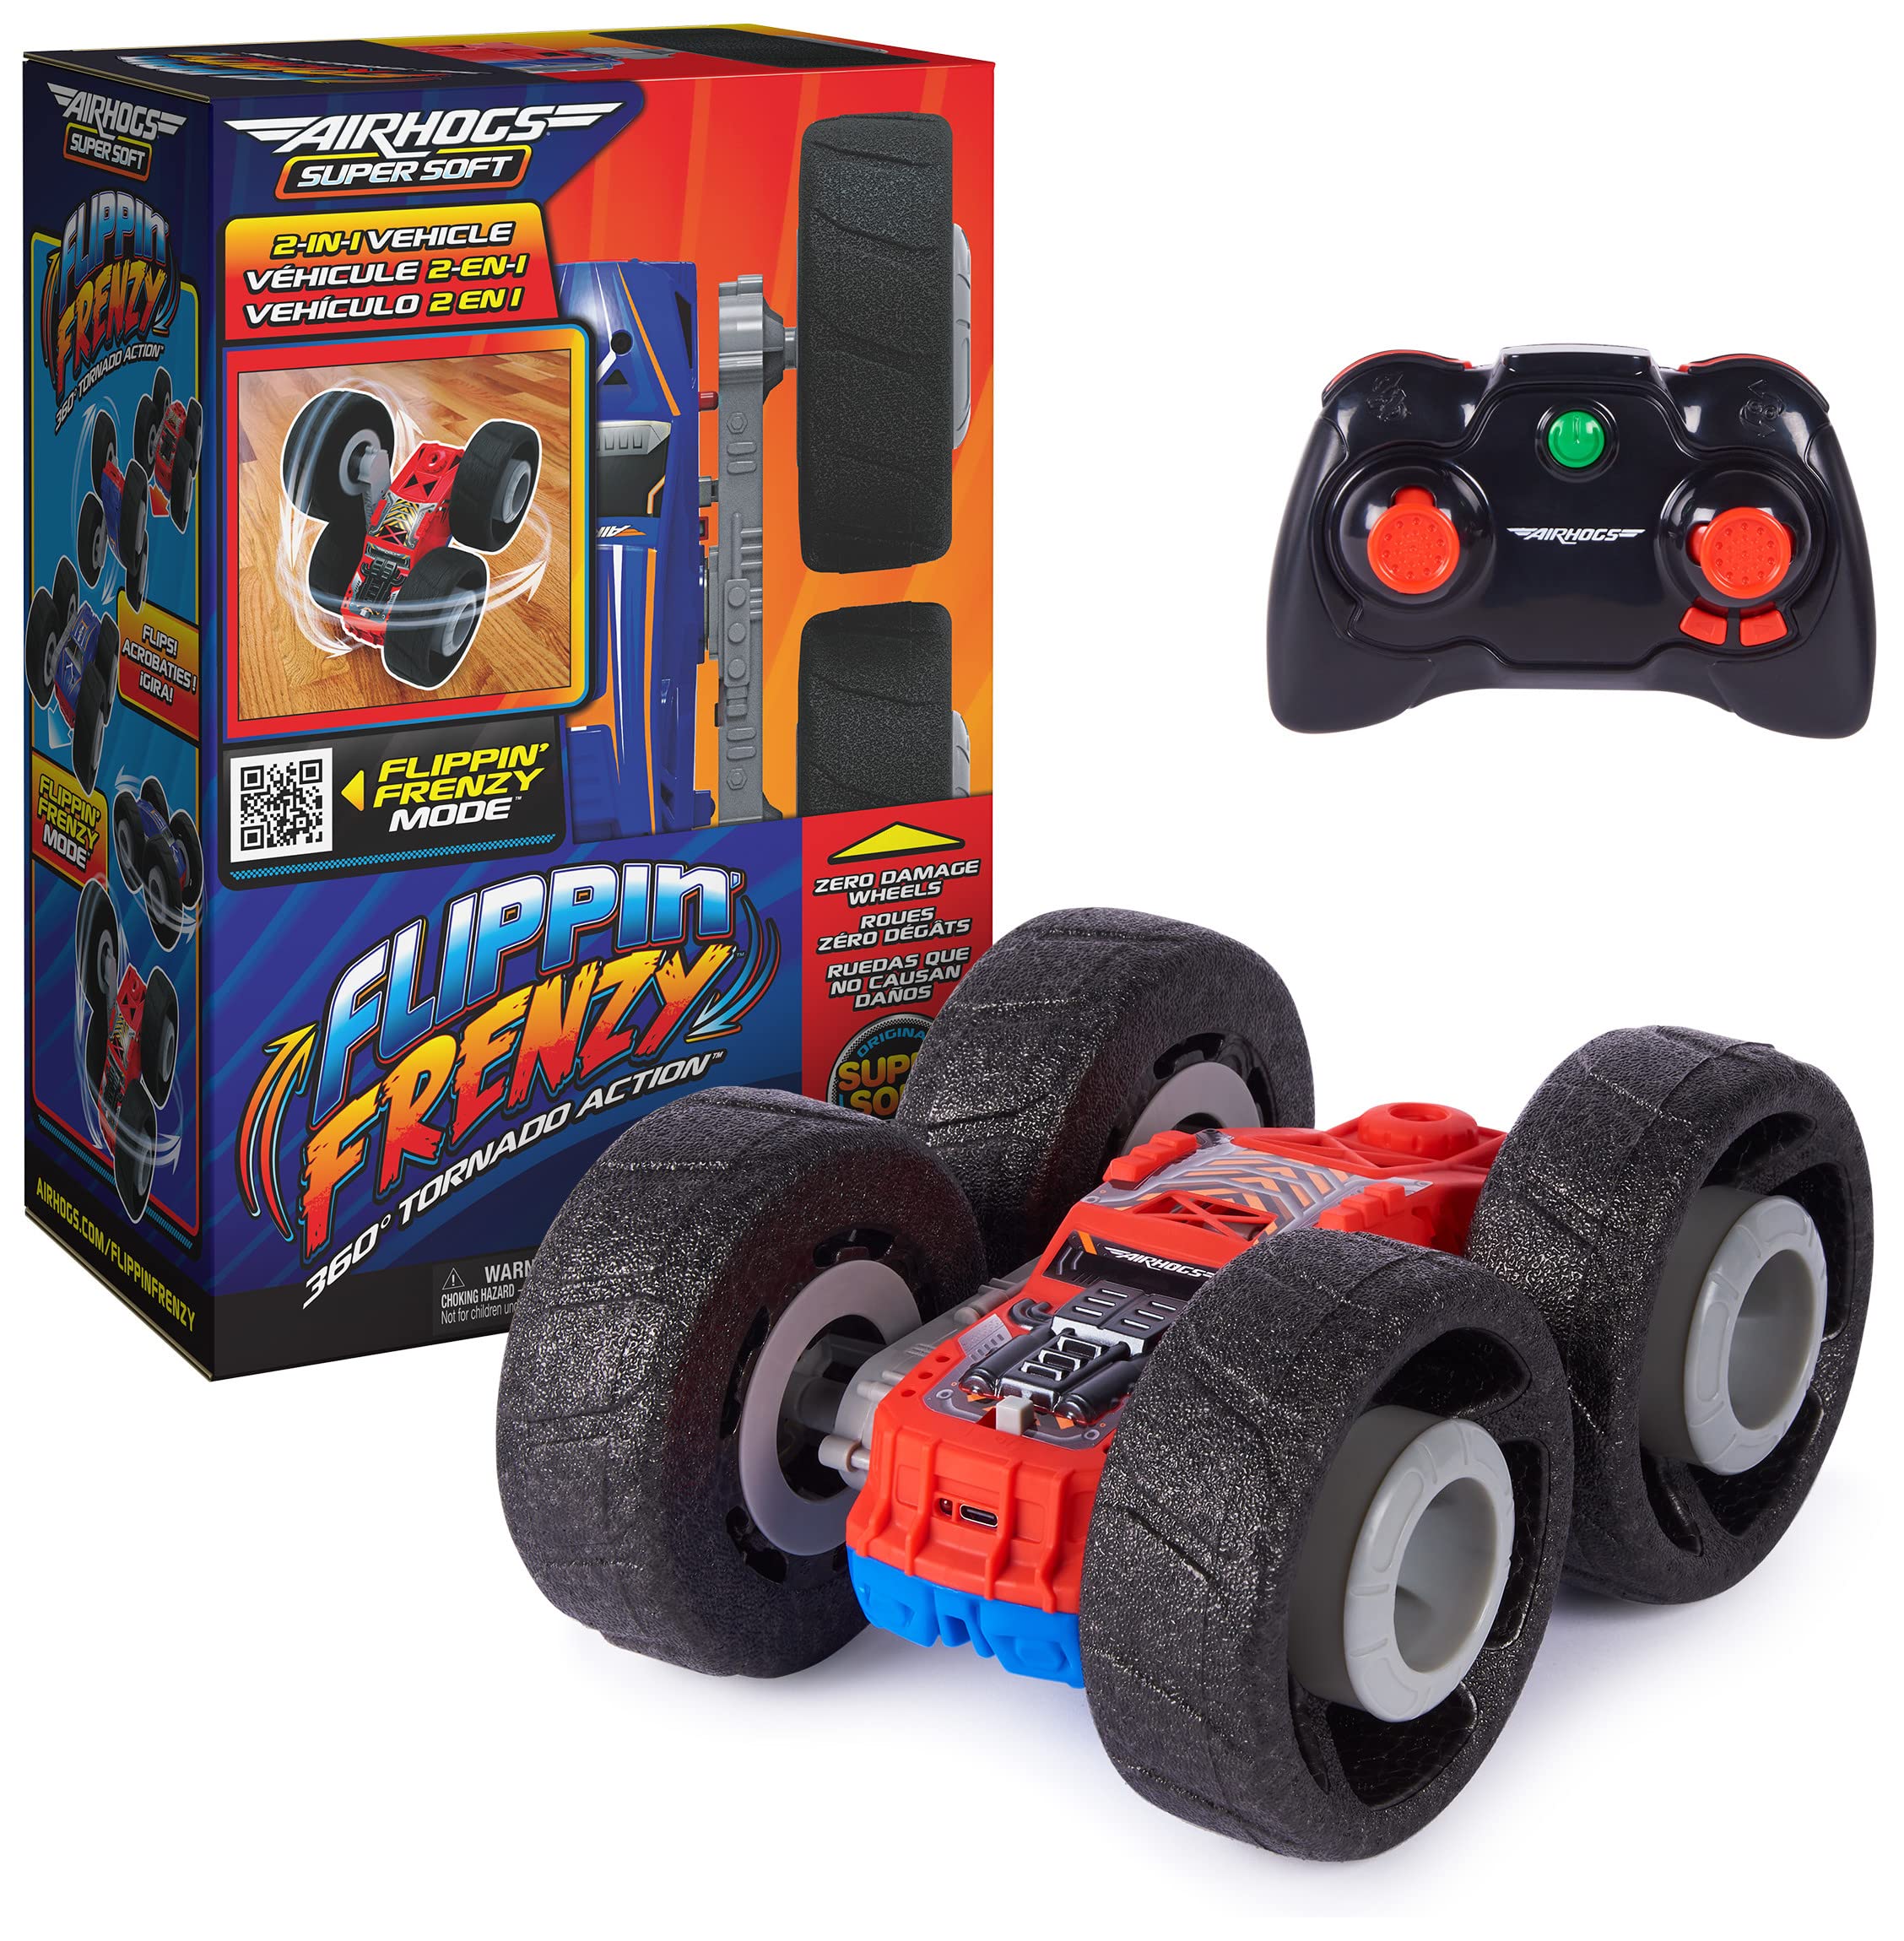 Air Hogs Super Soft Wheel Flippin’ Frenzy 2-in-1 Stunt RC Vehicle $18.54 + Free Shipping w/ Prime or on $25+